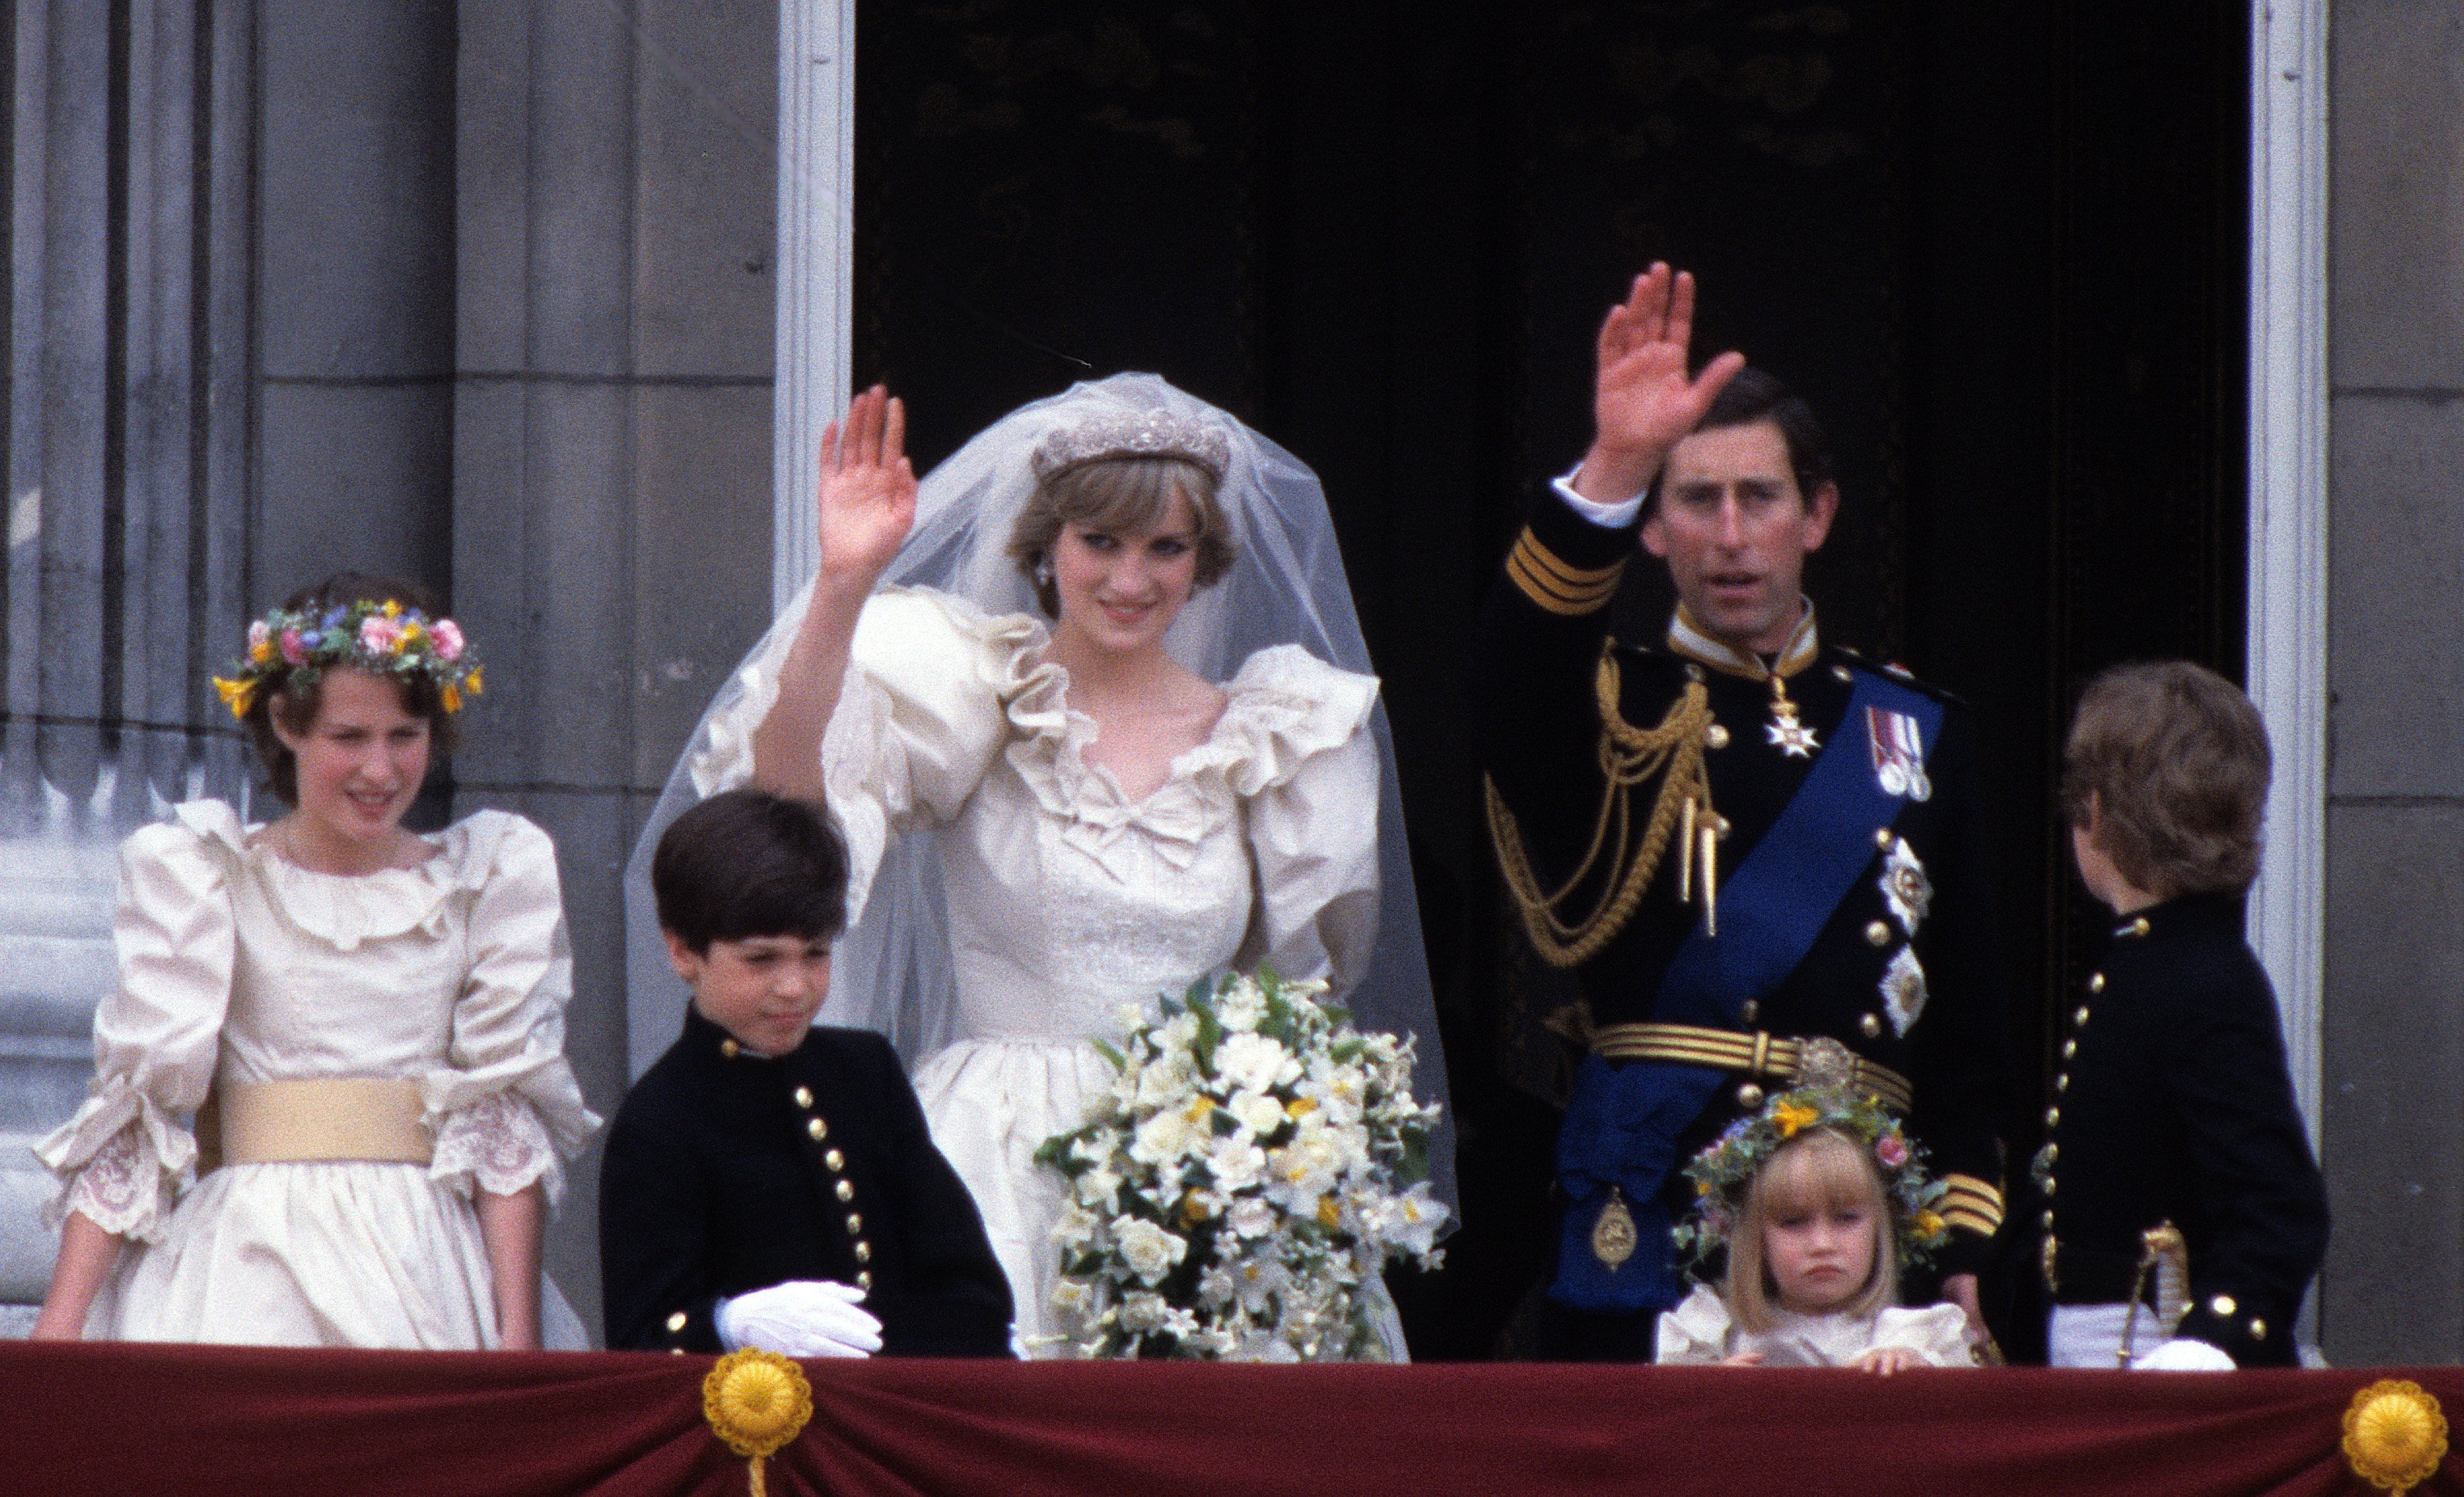 Prince Charles, Prince of Wales and Diana, Princess of Waleswave from the balcony of Buckingham Palace following their wedding July 29, 1981 | Photo: GettyImages